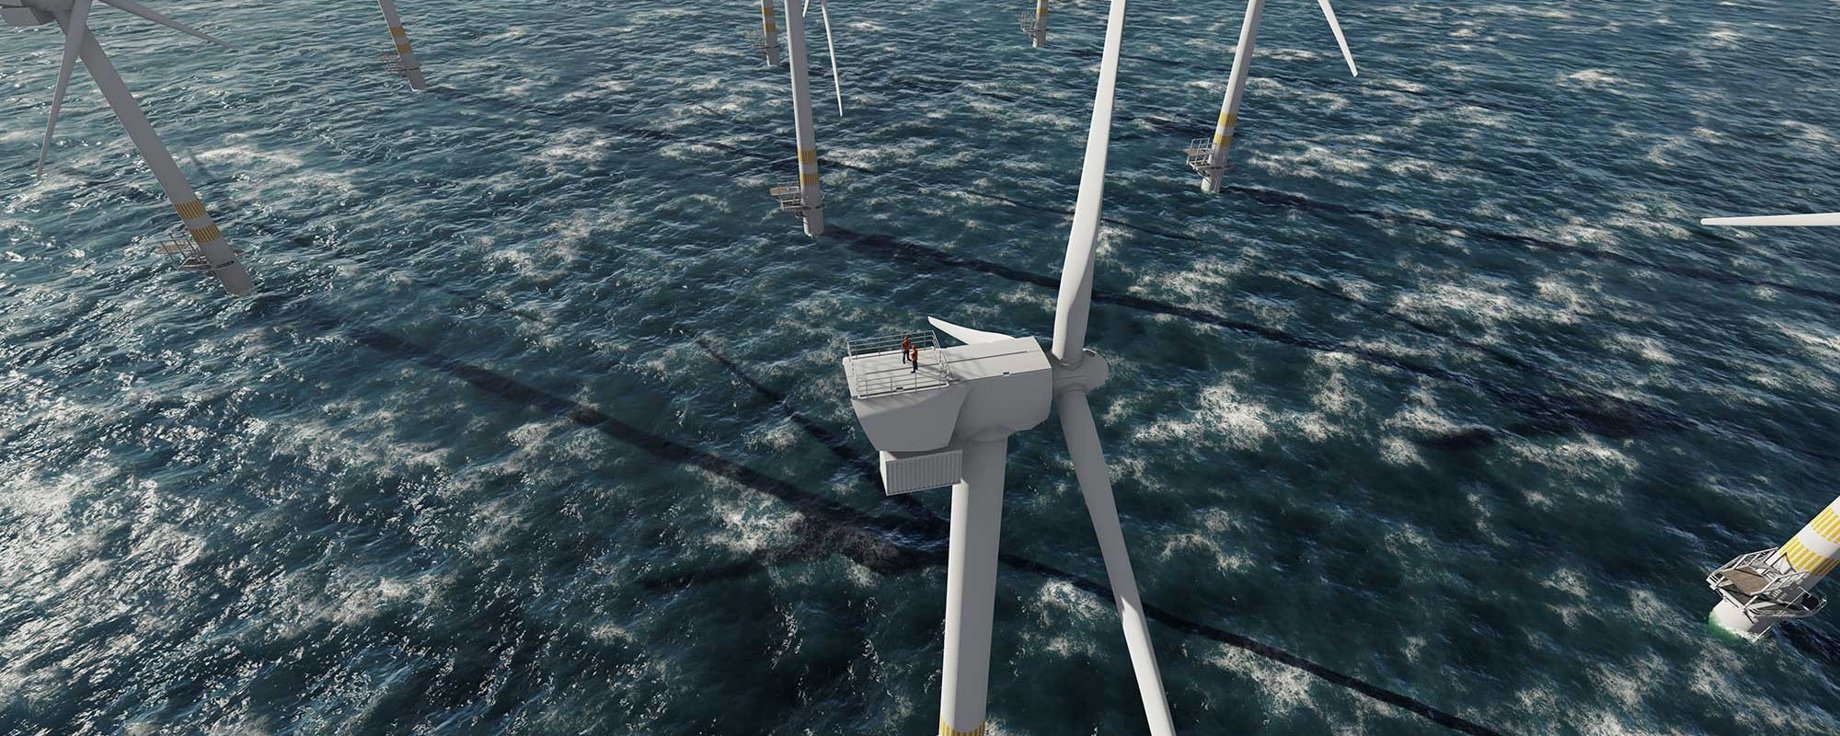 Aerial view of an offshore wind farm